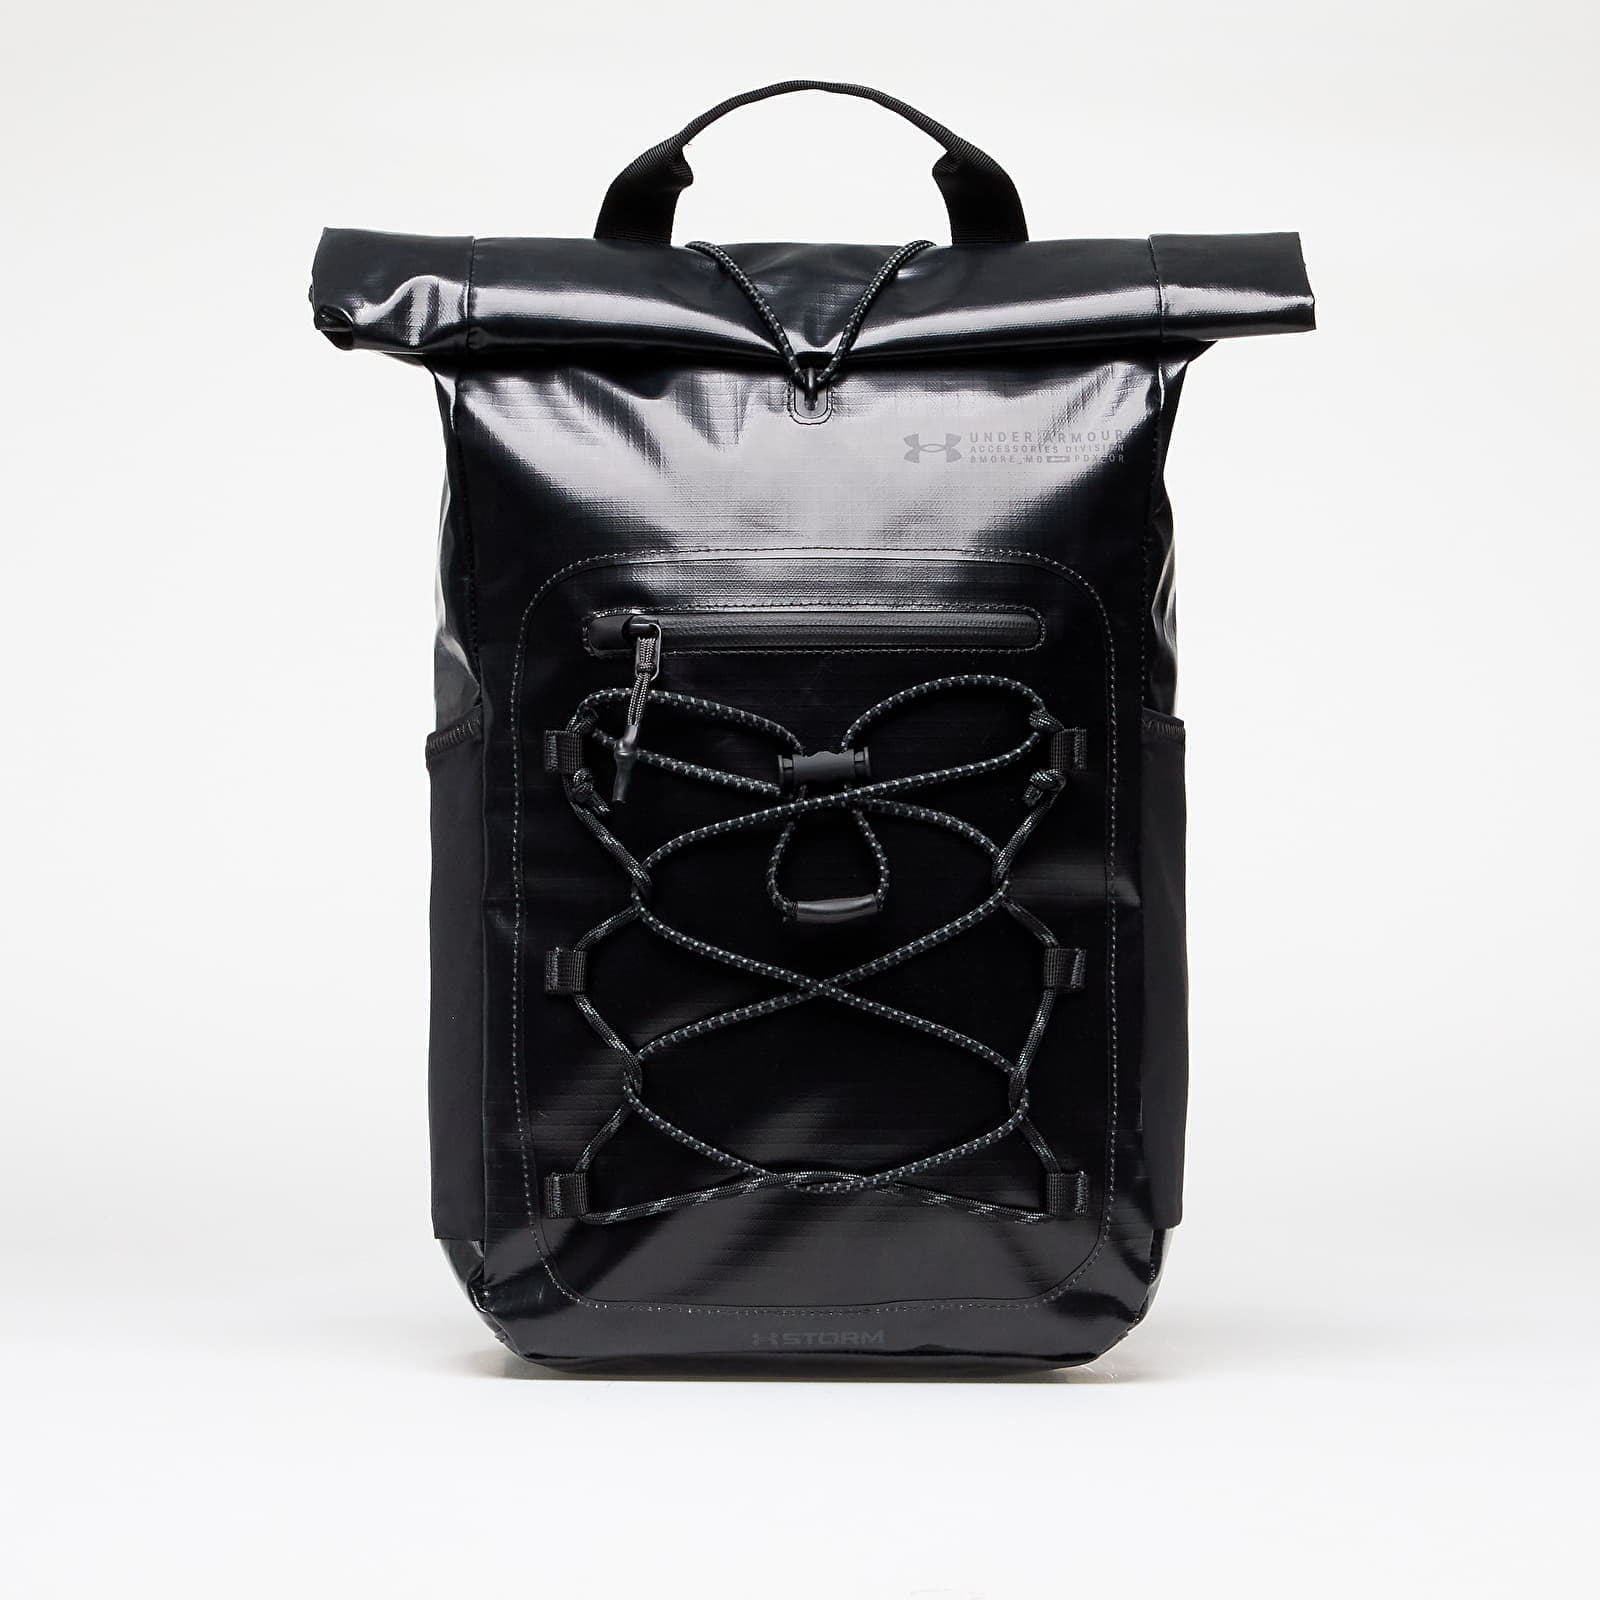 Under Armour - summit backpack black